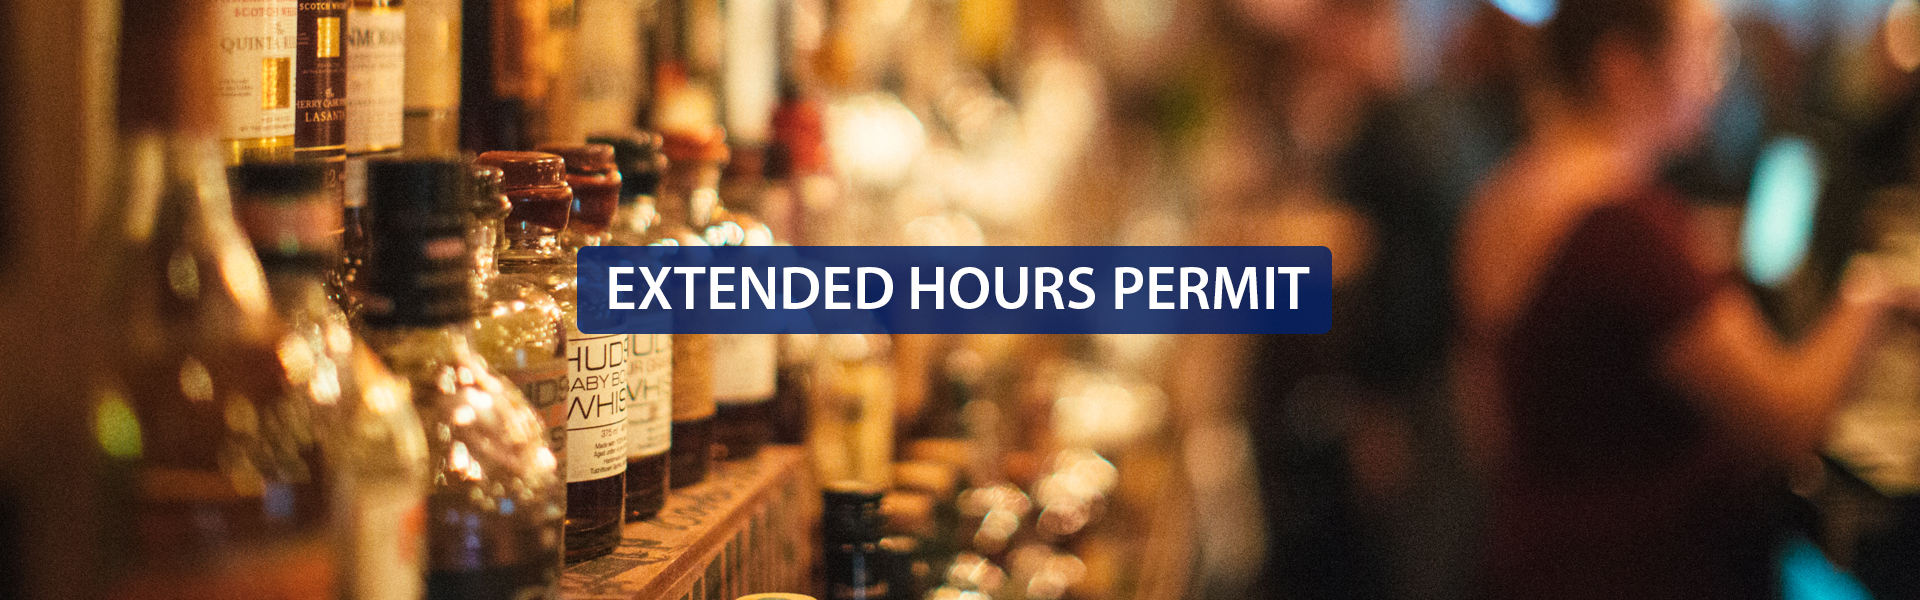 Extended hours bar